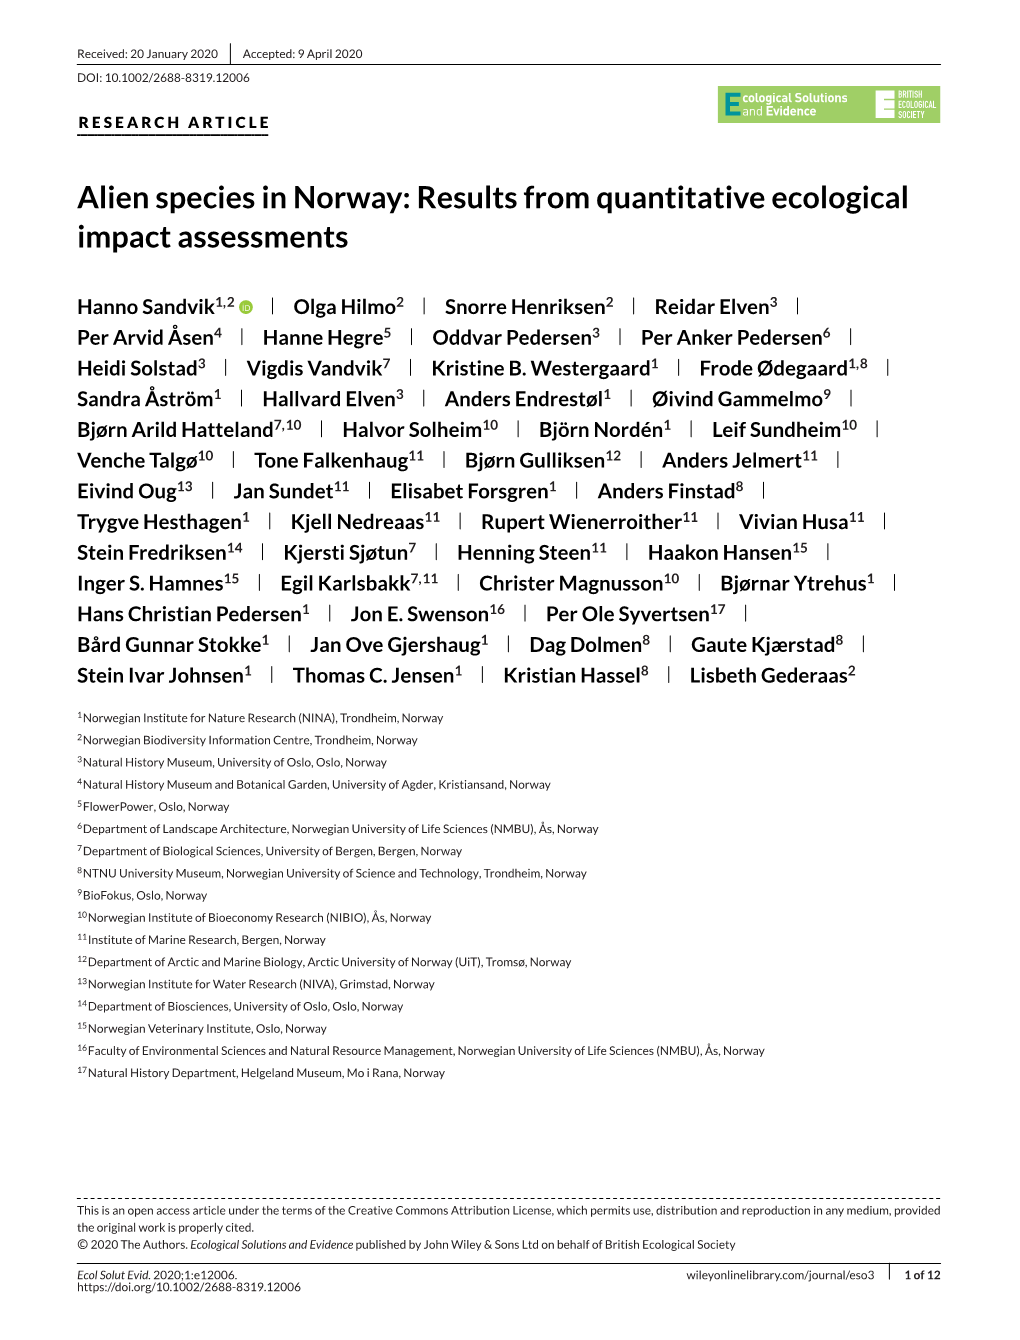 Alien Species in Norway: Results from Quantitative Ecological Impact Assessments